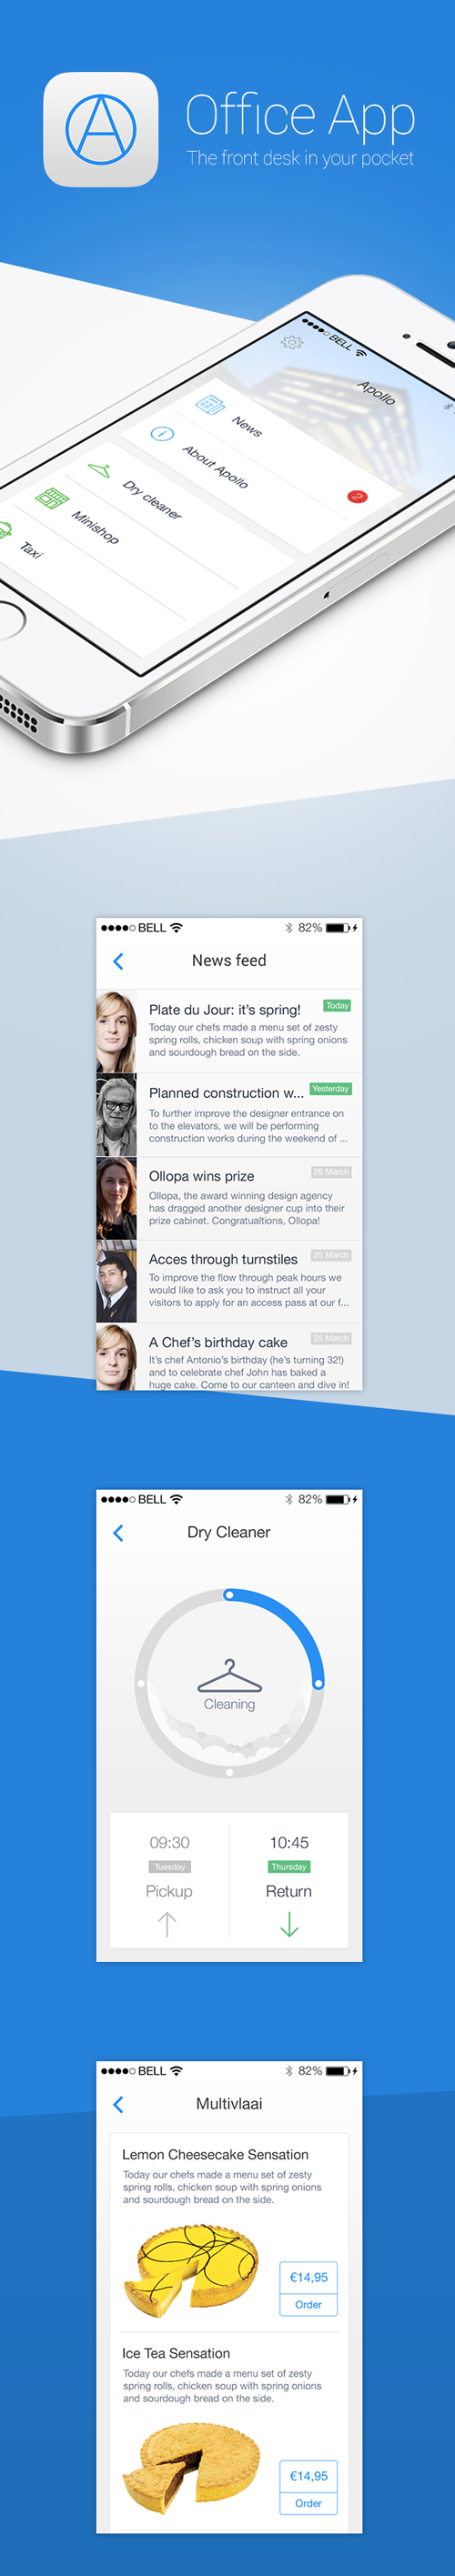 Amazing Mobile App UI Designs with Ultimate User Experience - 27